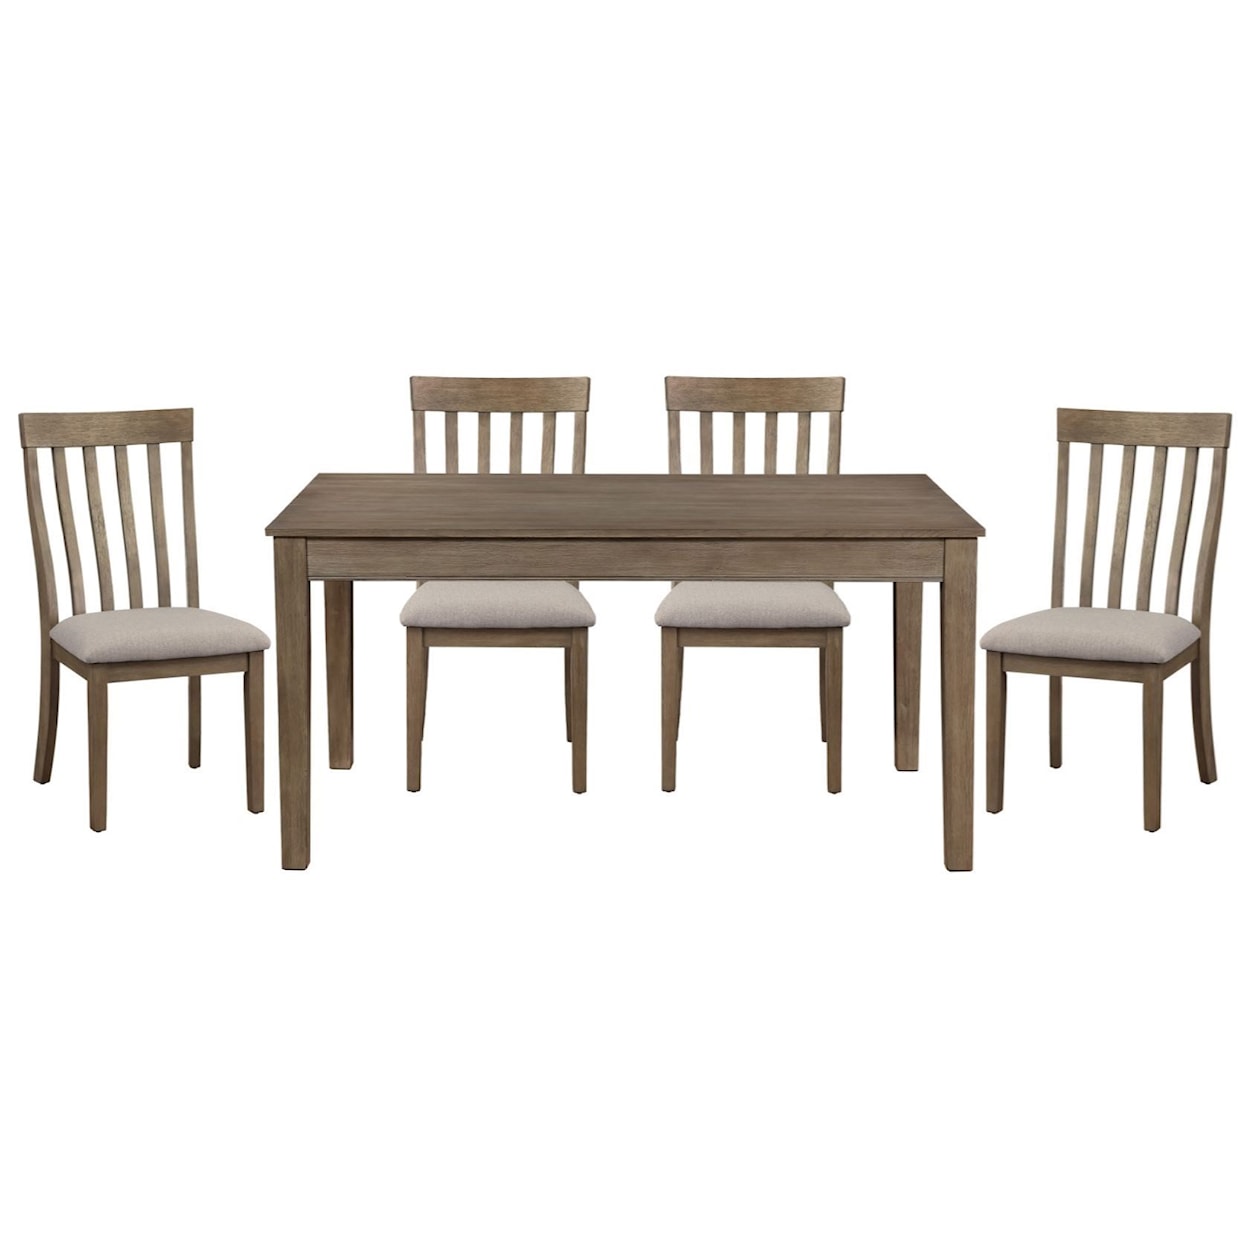 Homelegance Furniture Armhurst 5-Piece Table and Chair Set